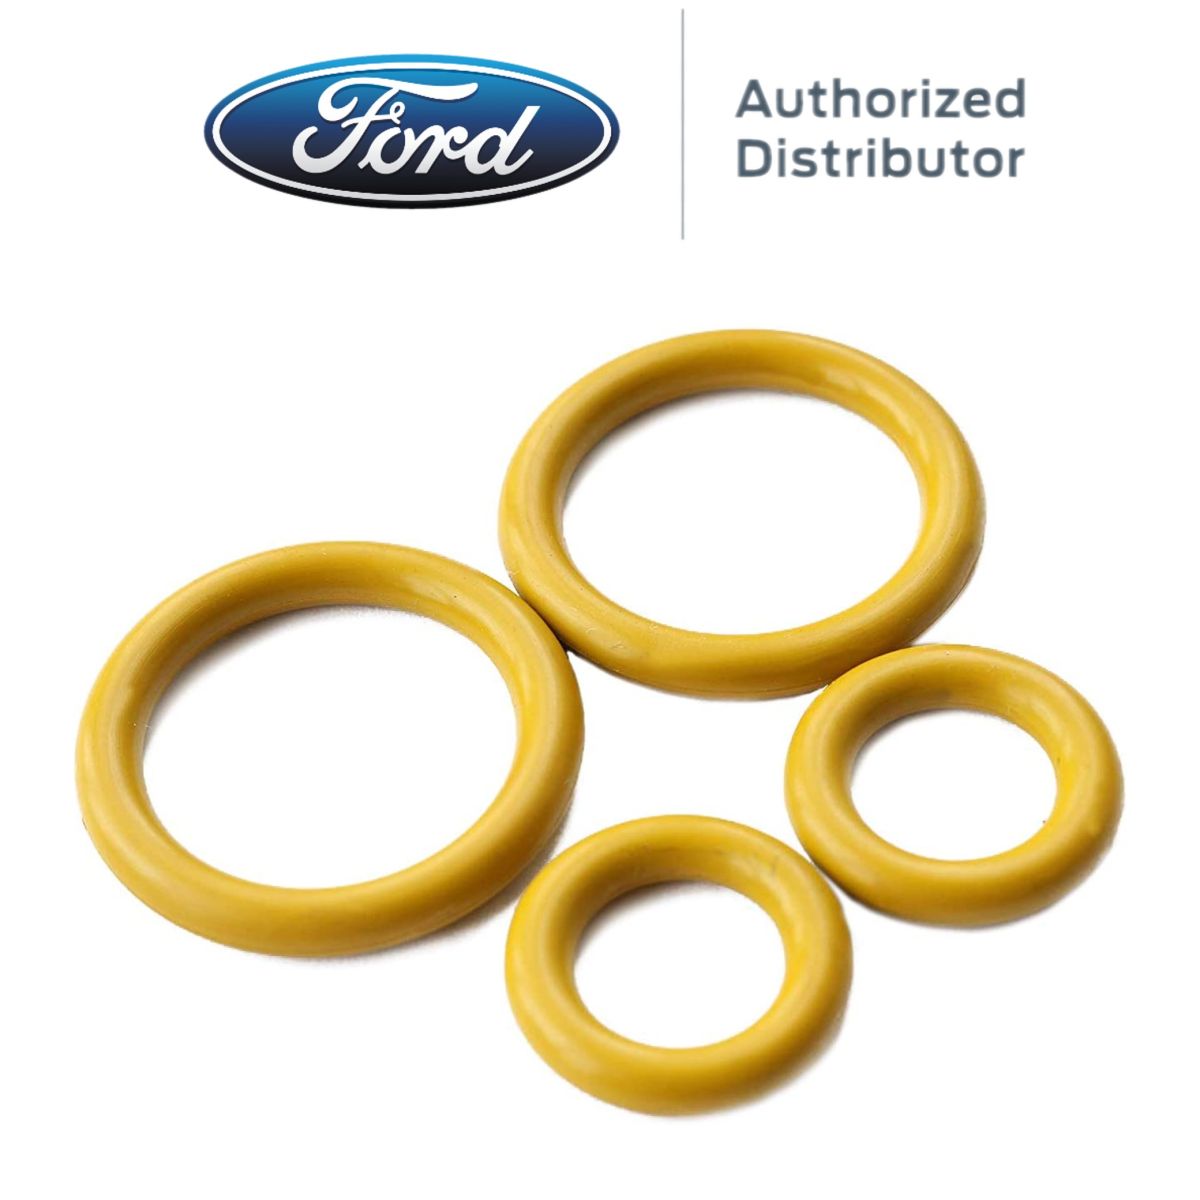 OEM Ford - OEM Ford Pedestal Yellow O Ring Gasket Set For 1999-2003 Ford 7.3L Powerstroke